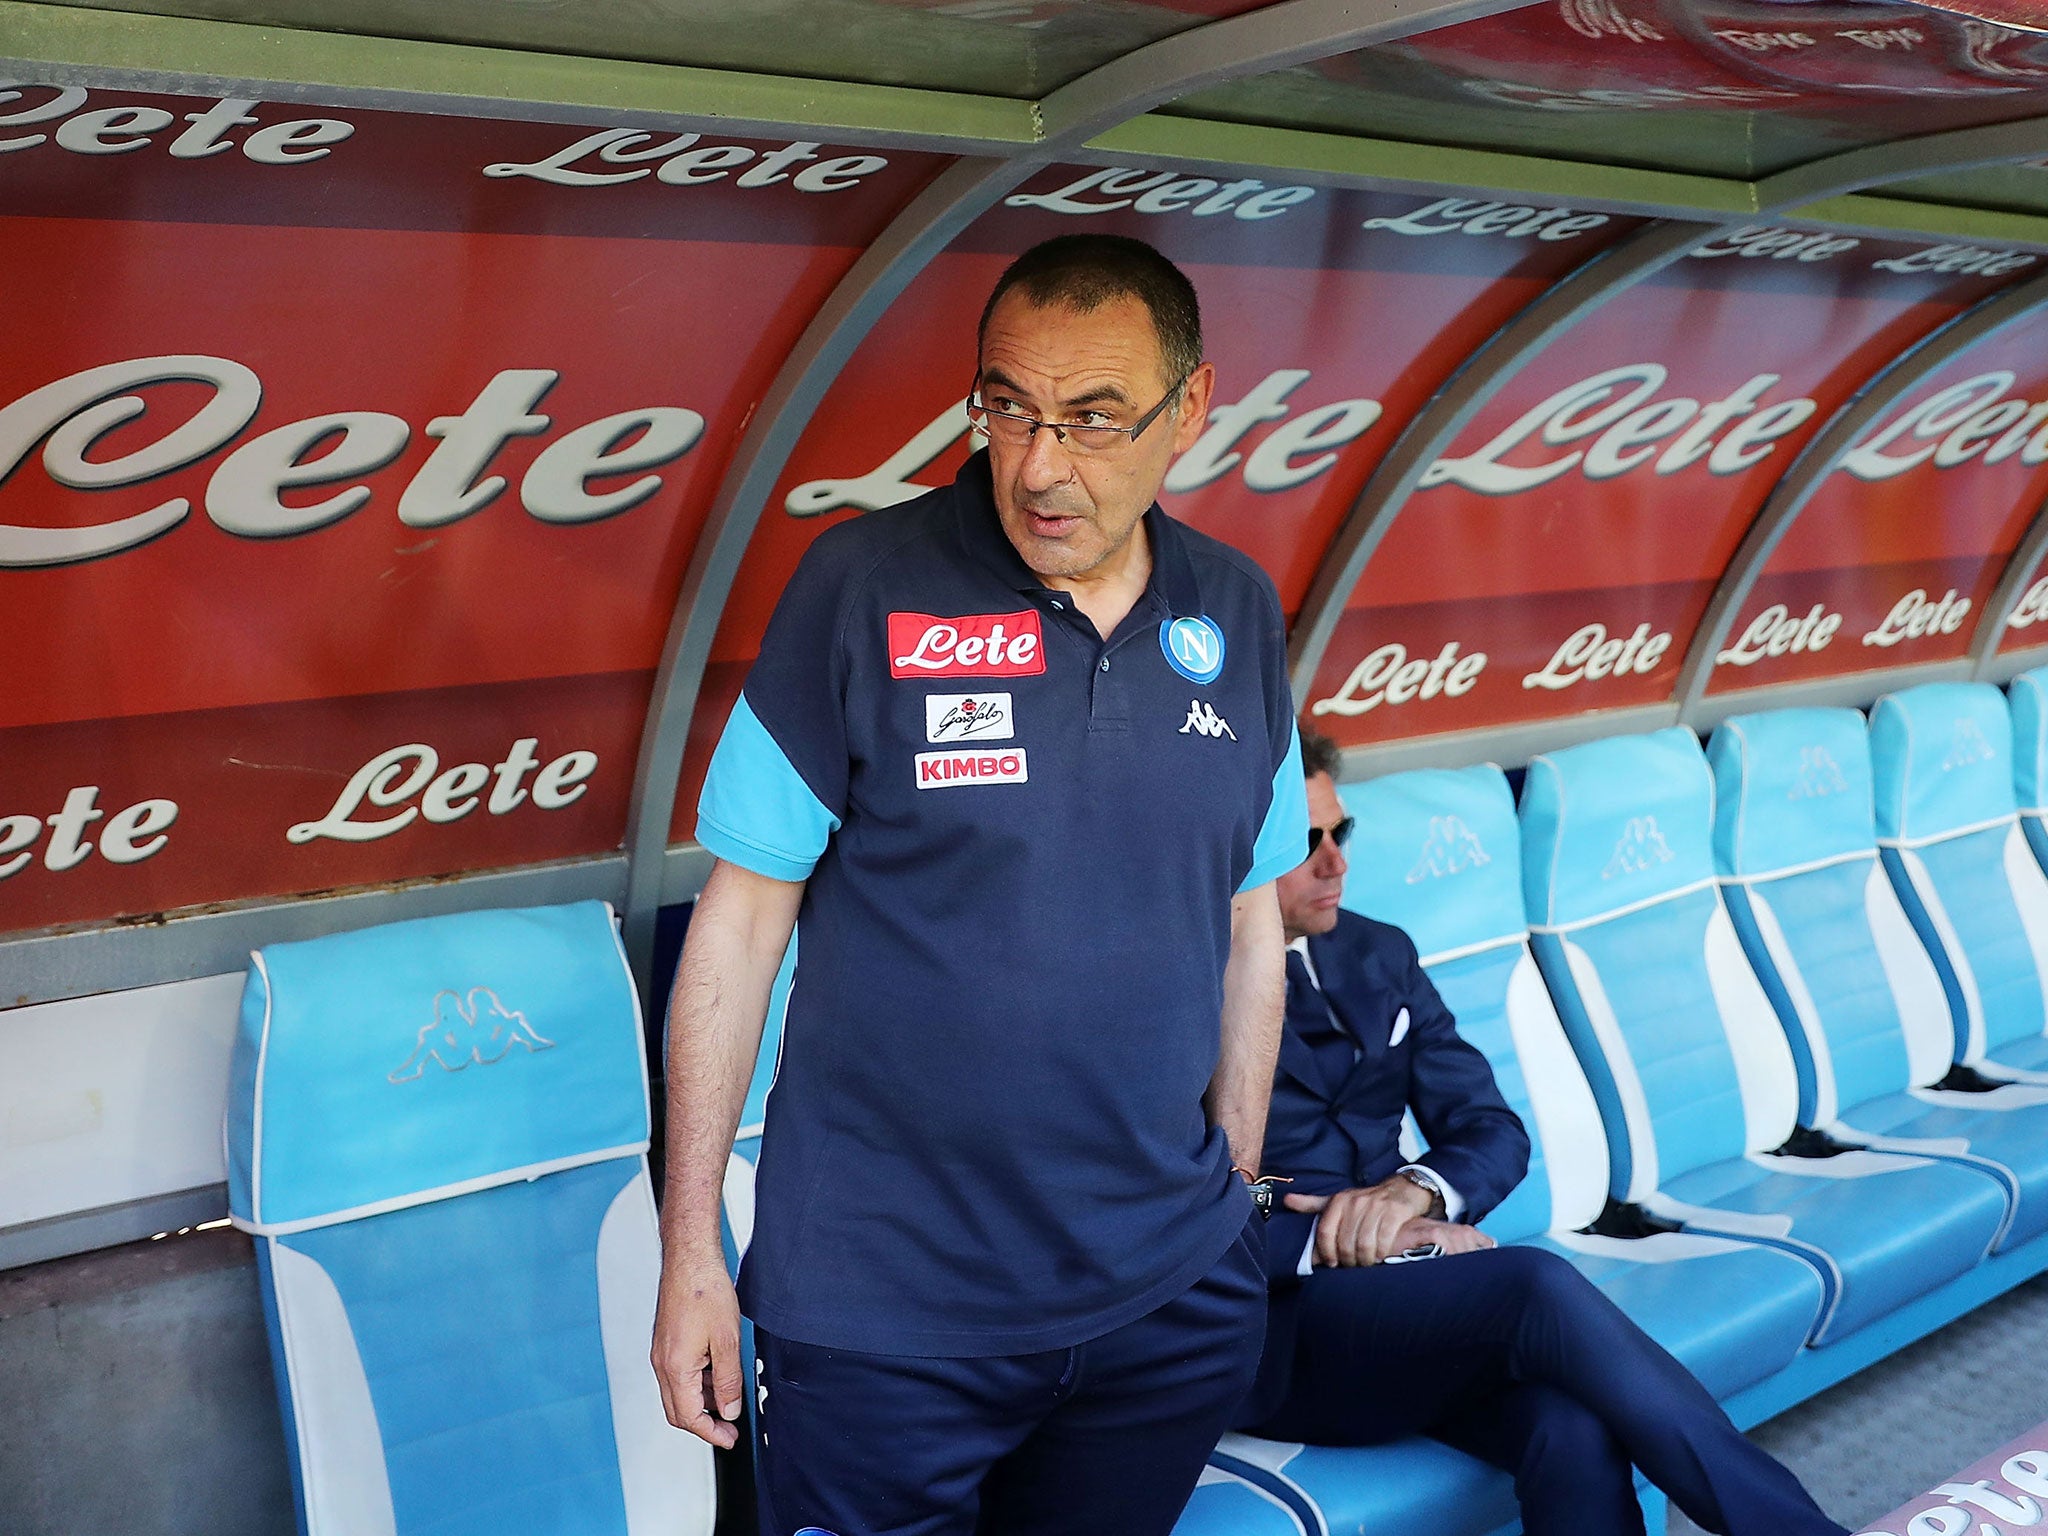 Sarri came close to ending Napoli's 28-year title drought